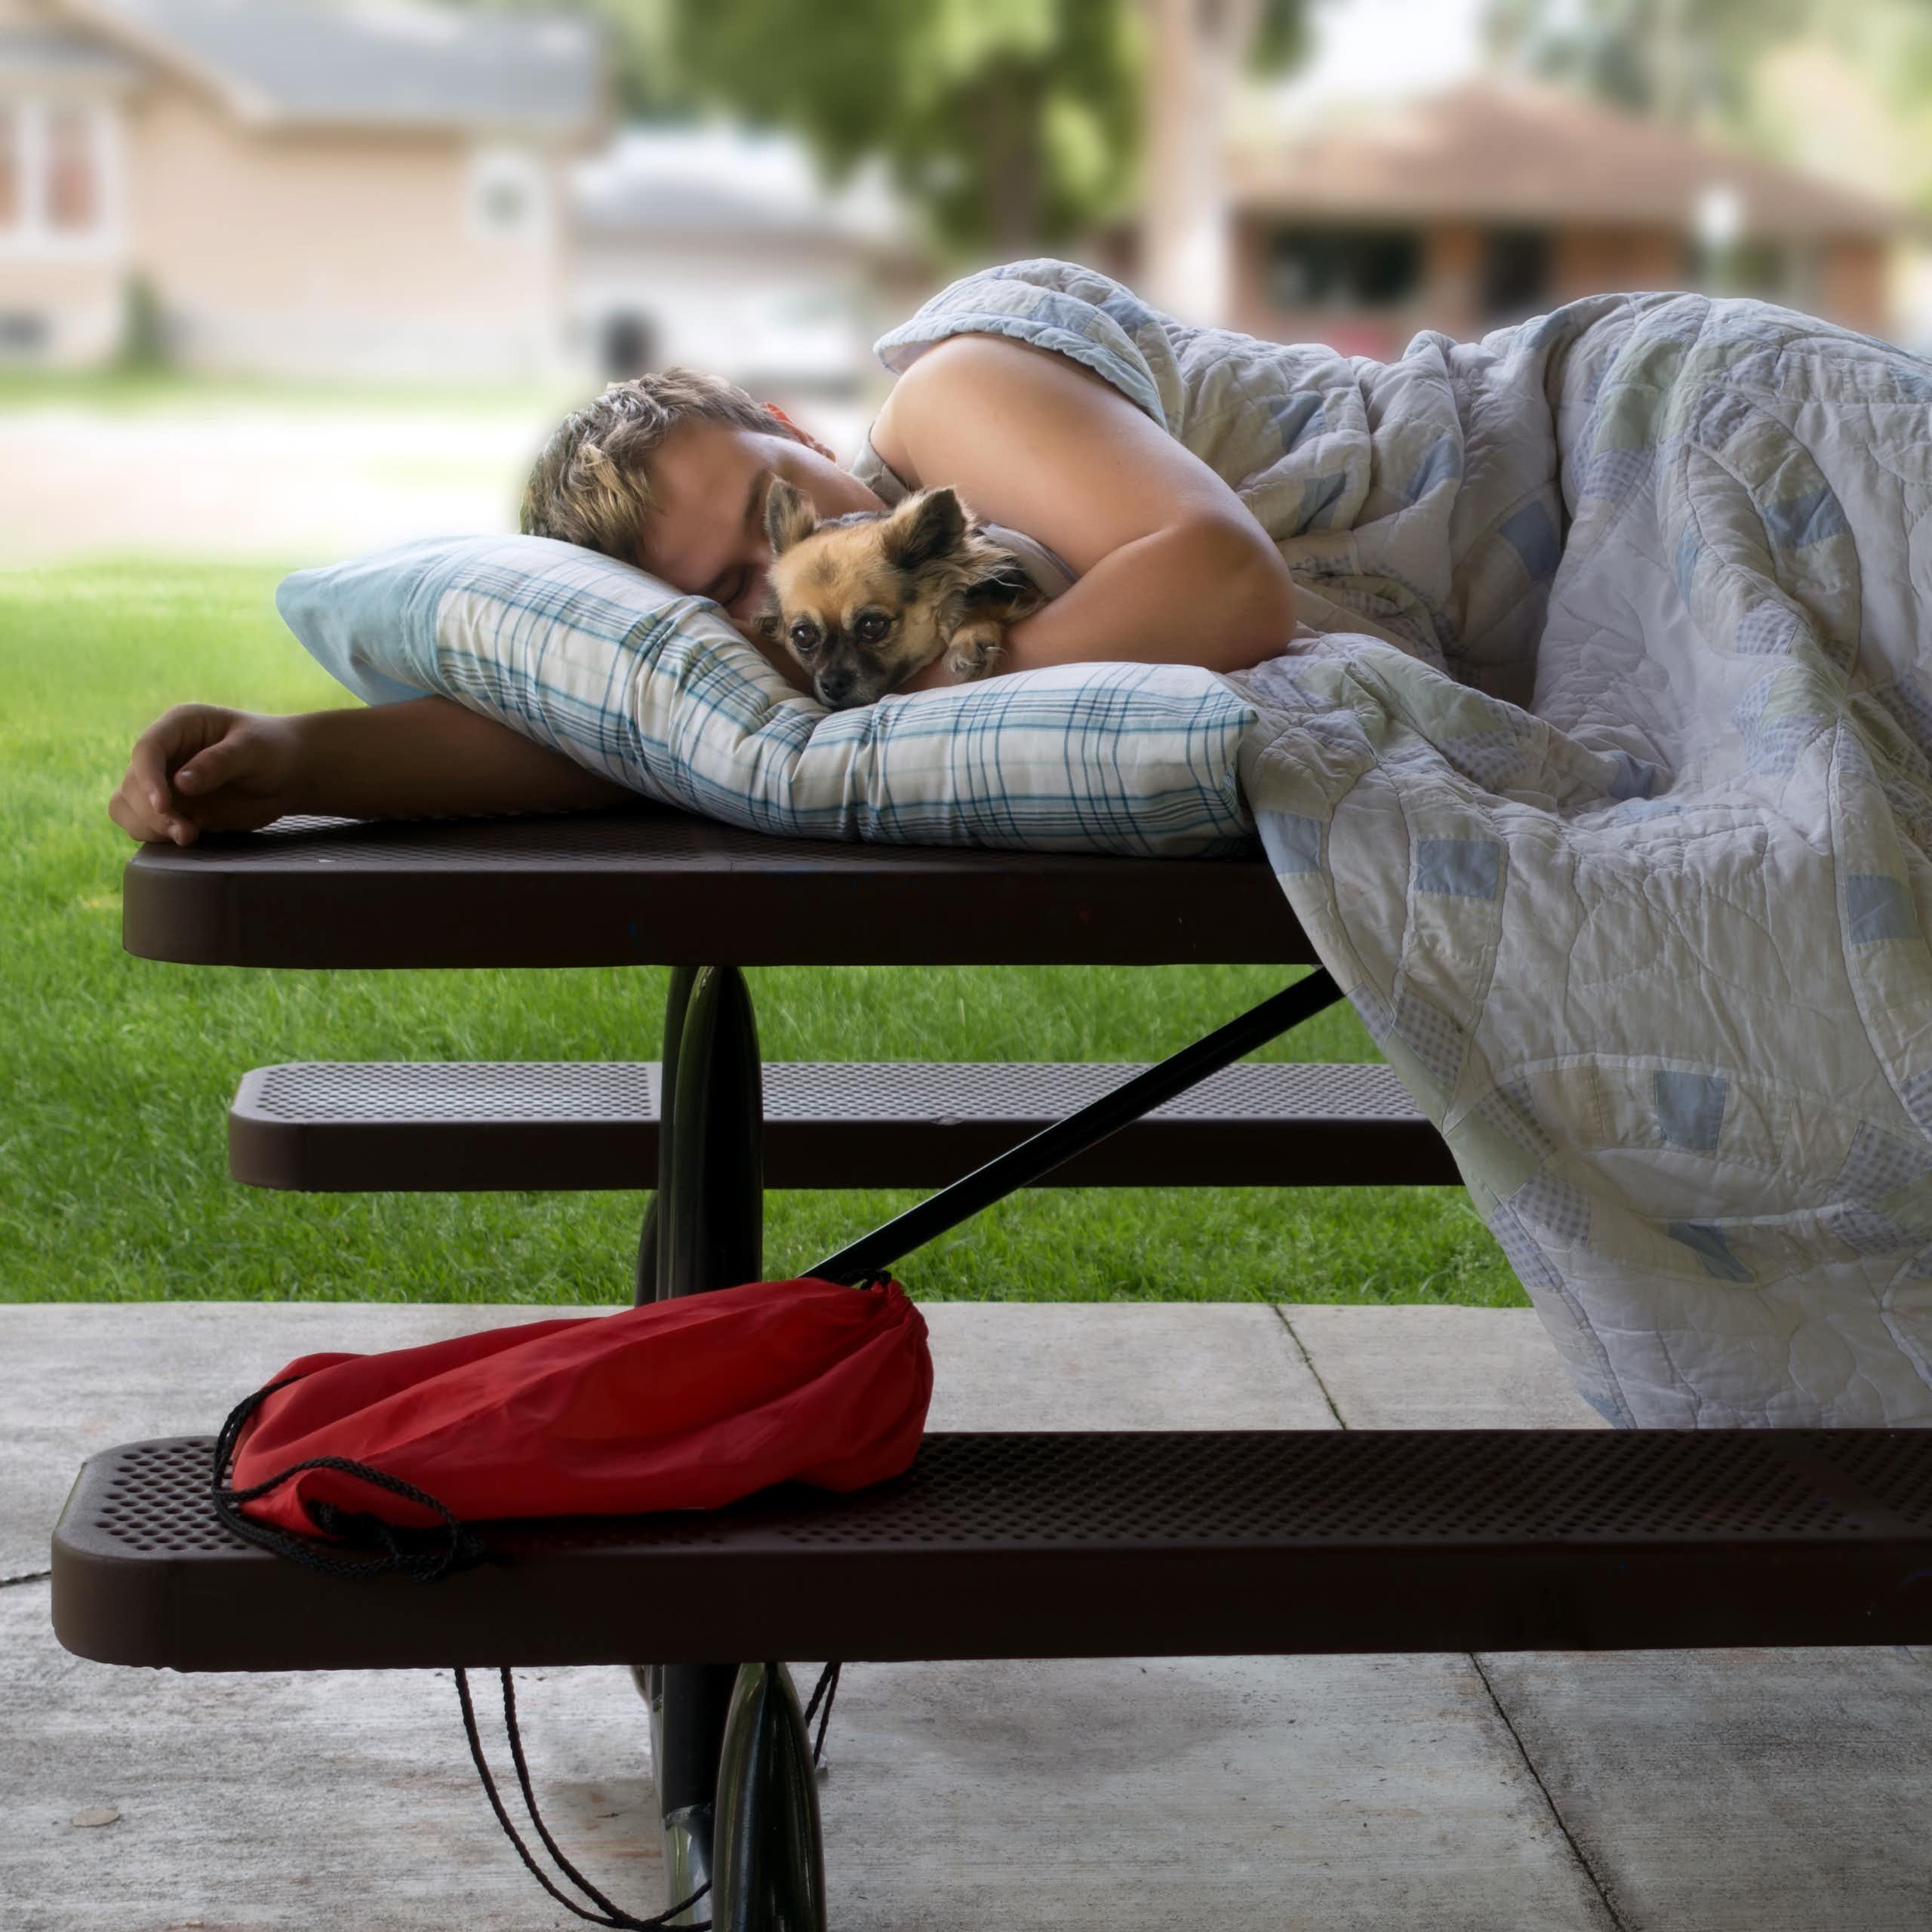 A person sleeps on a park bench with a small dog tucked under their arms